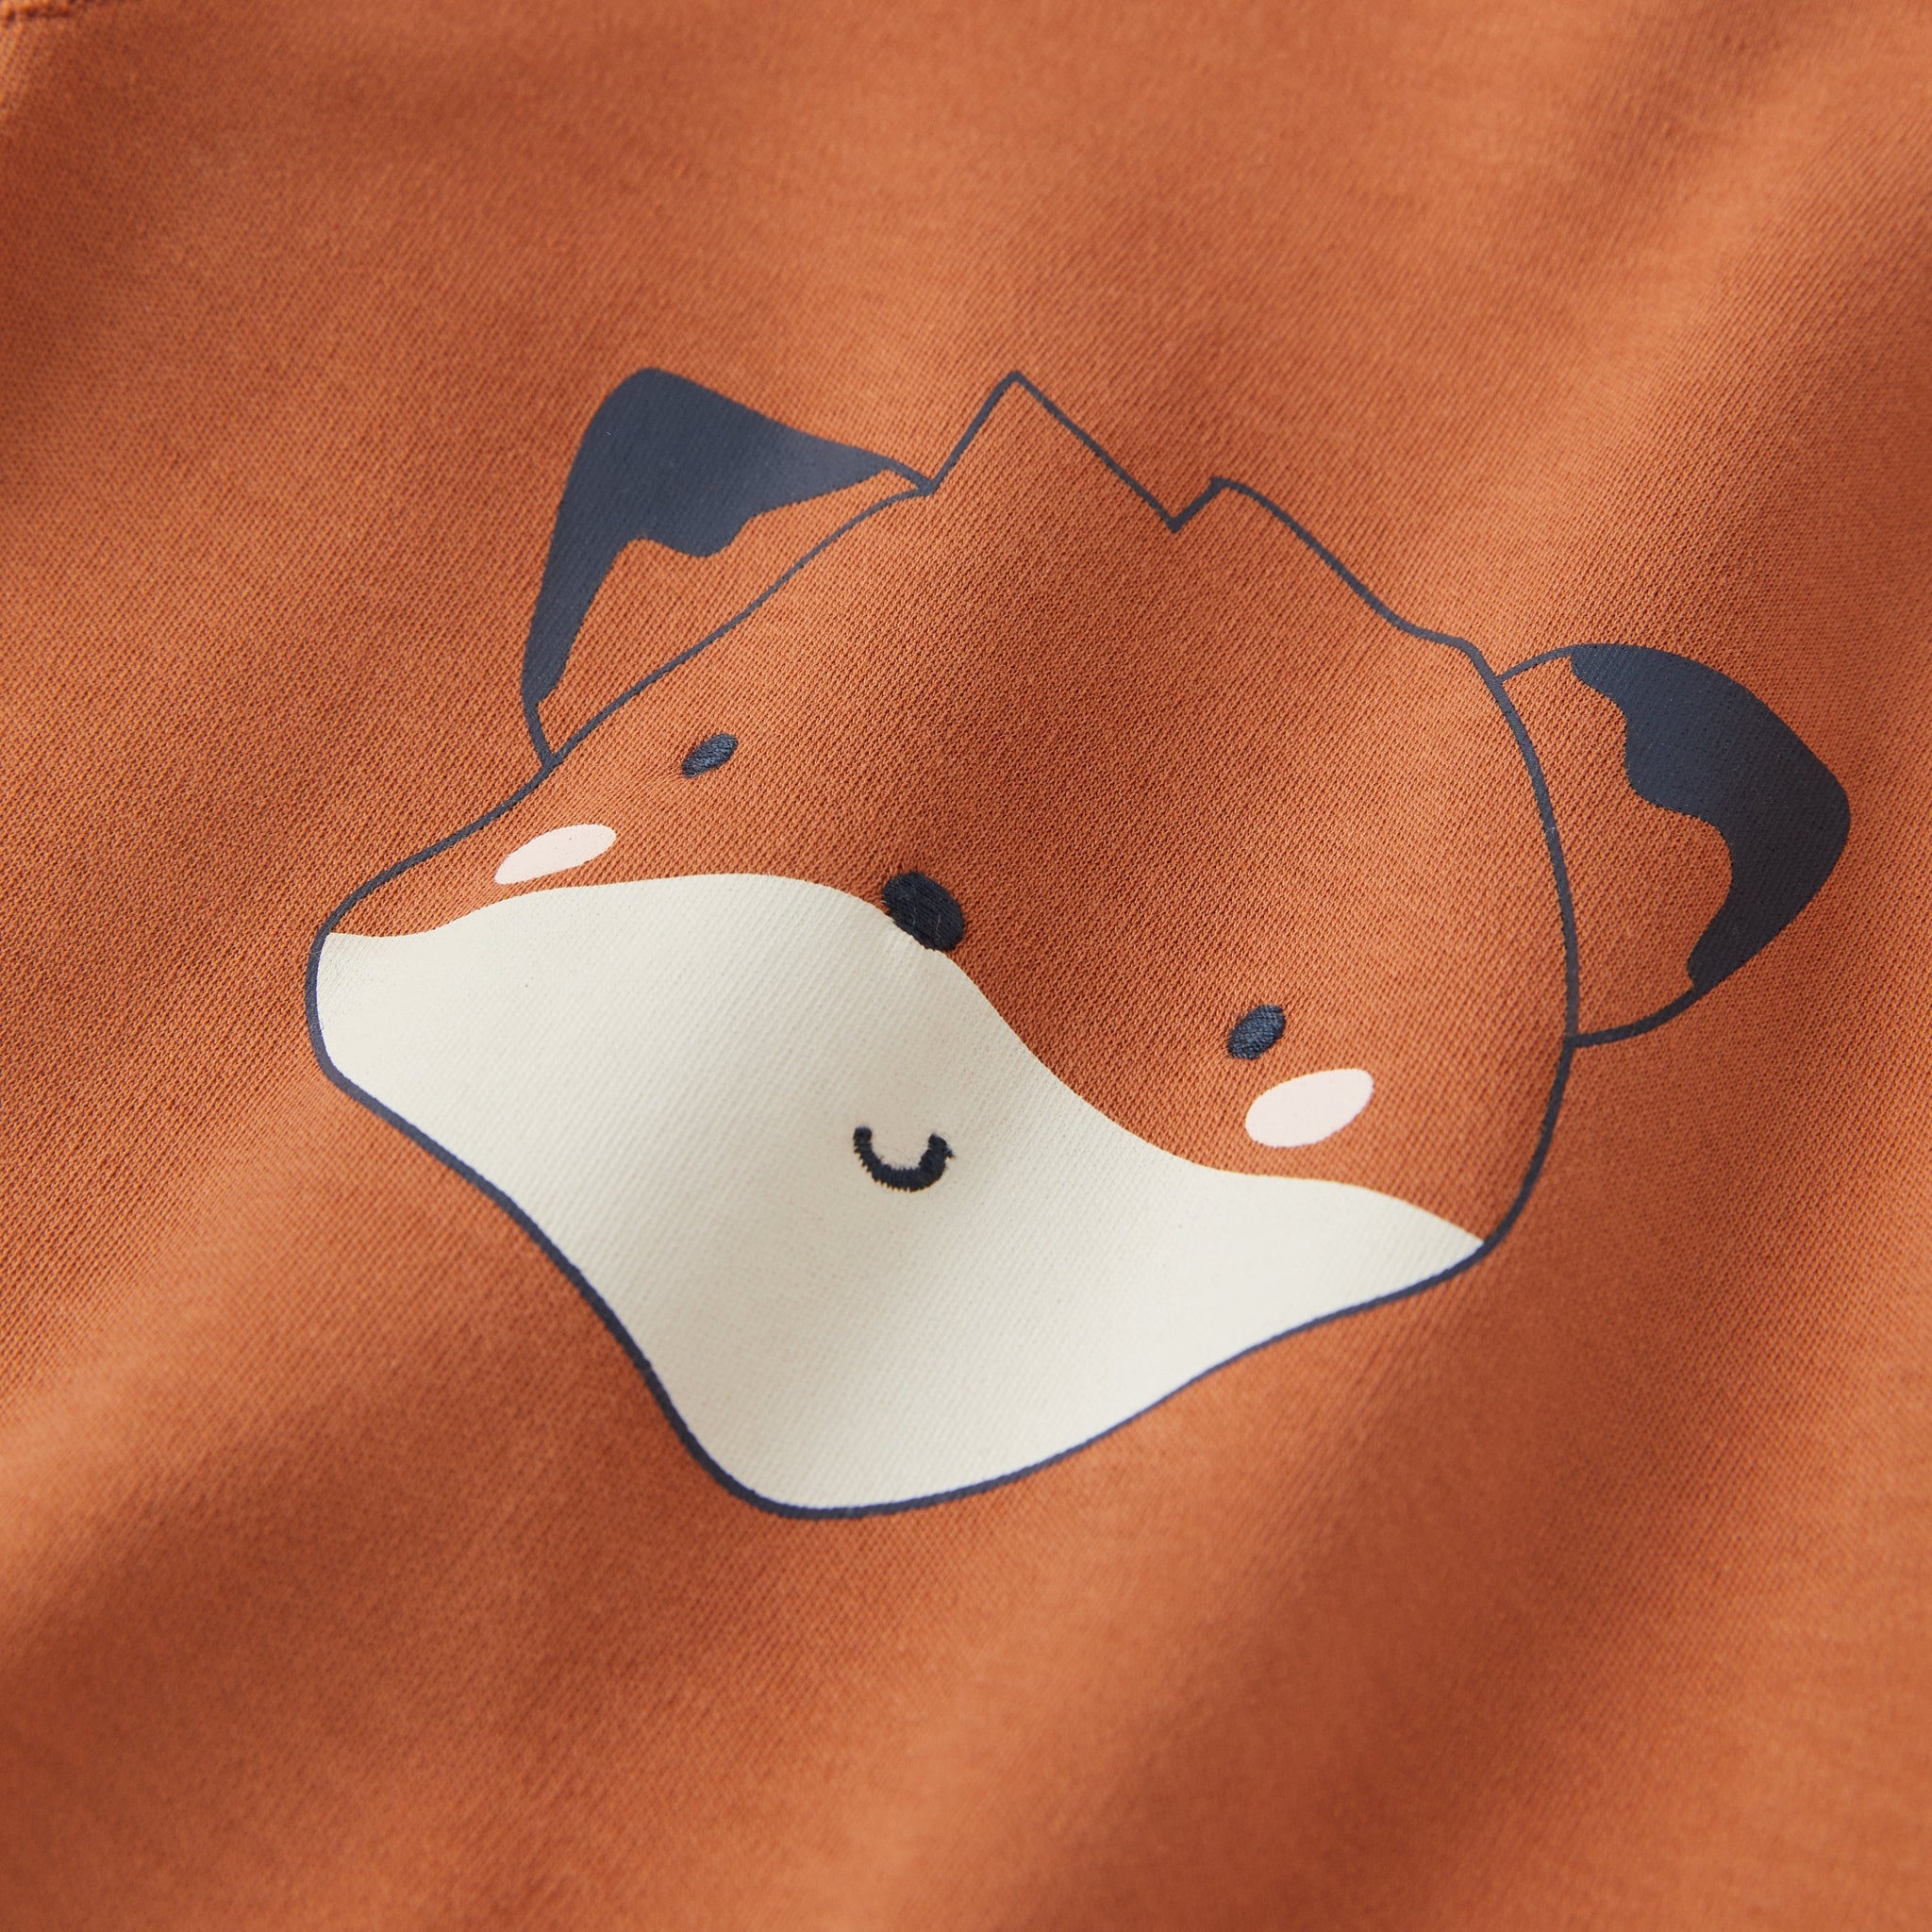 Organic Cotton Orange Babygrow from the Polarn O. Pyret babywear collection. The best ethical kids clothes